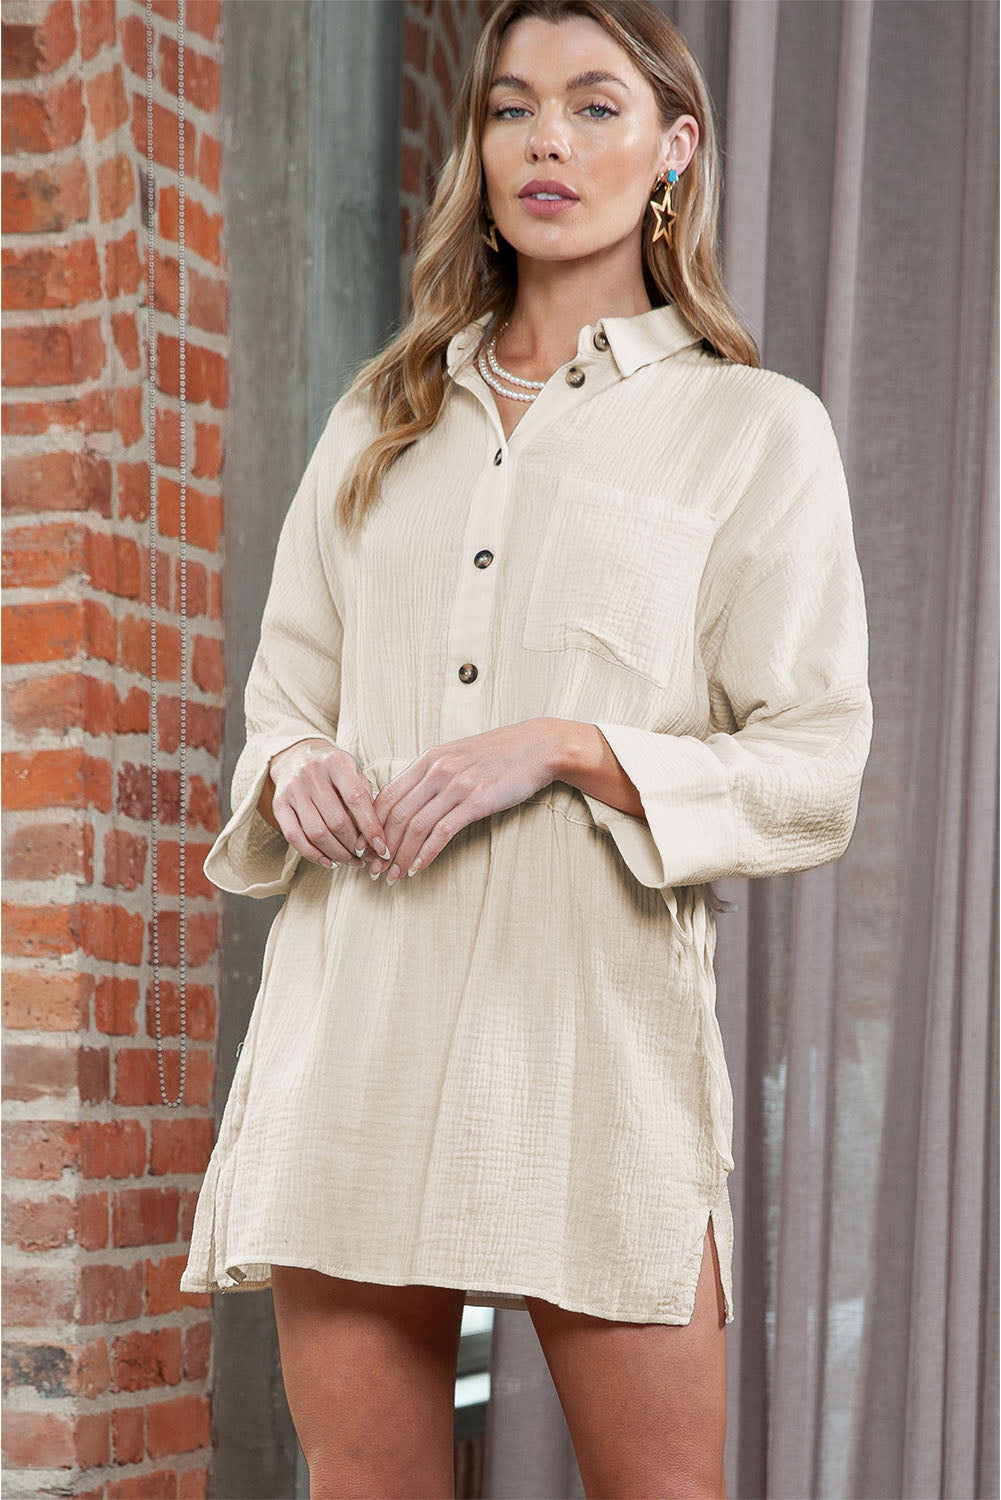 Beige Cotton Solid Color Buttoned Closure Long Sleeve Casual Dress